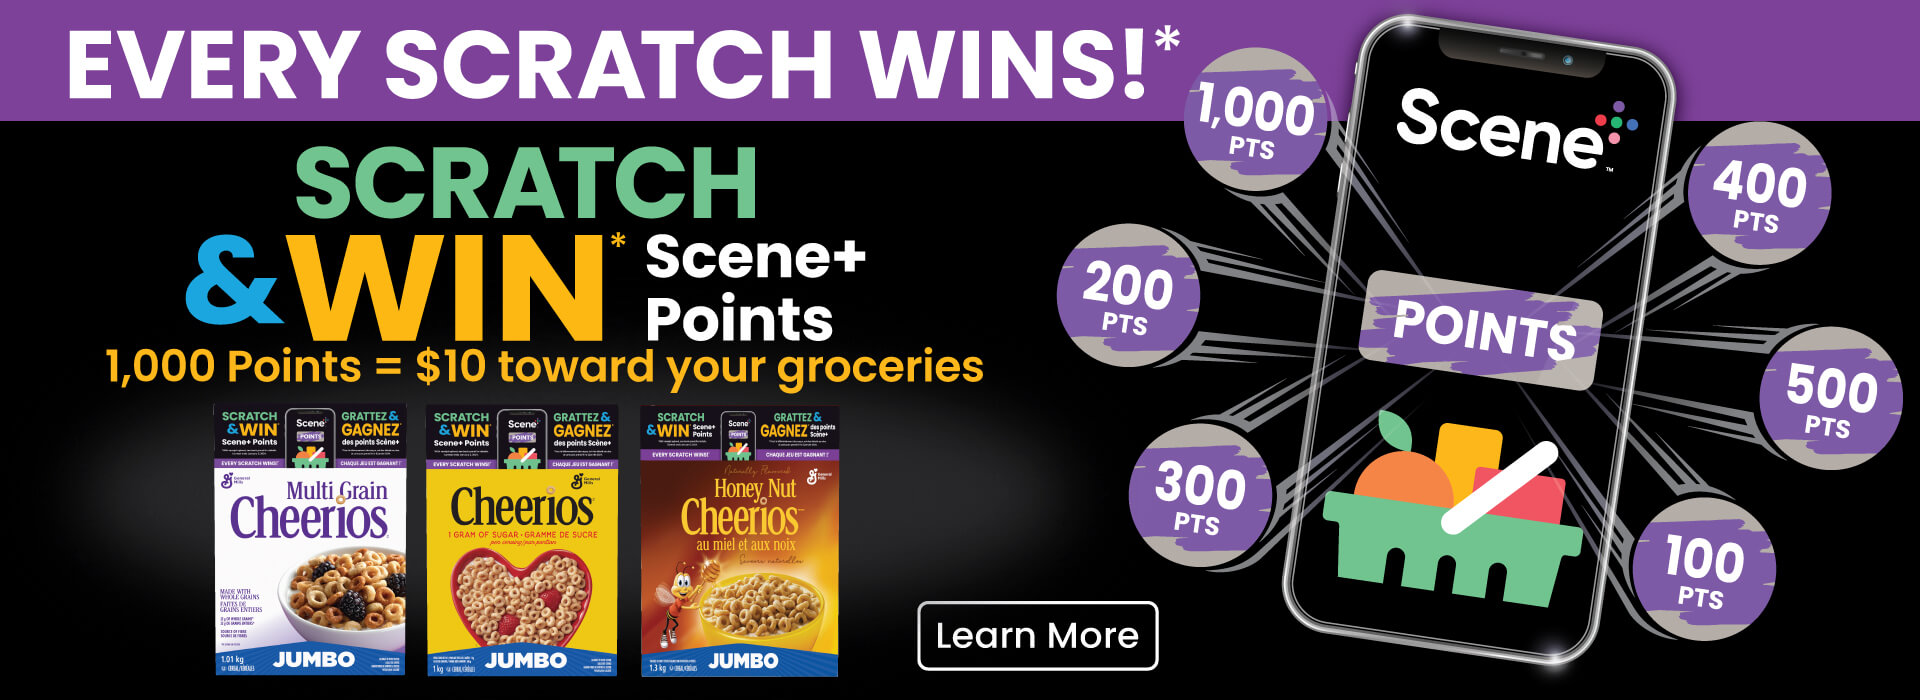 General Mills Scratch & Win Scene+ Points Contest. See specially marked Jumbo boxes of Cheerios or in-store for more details.